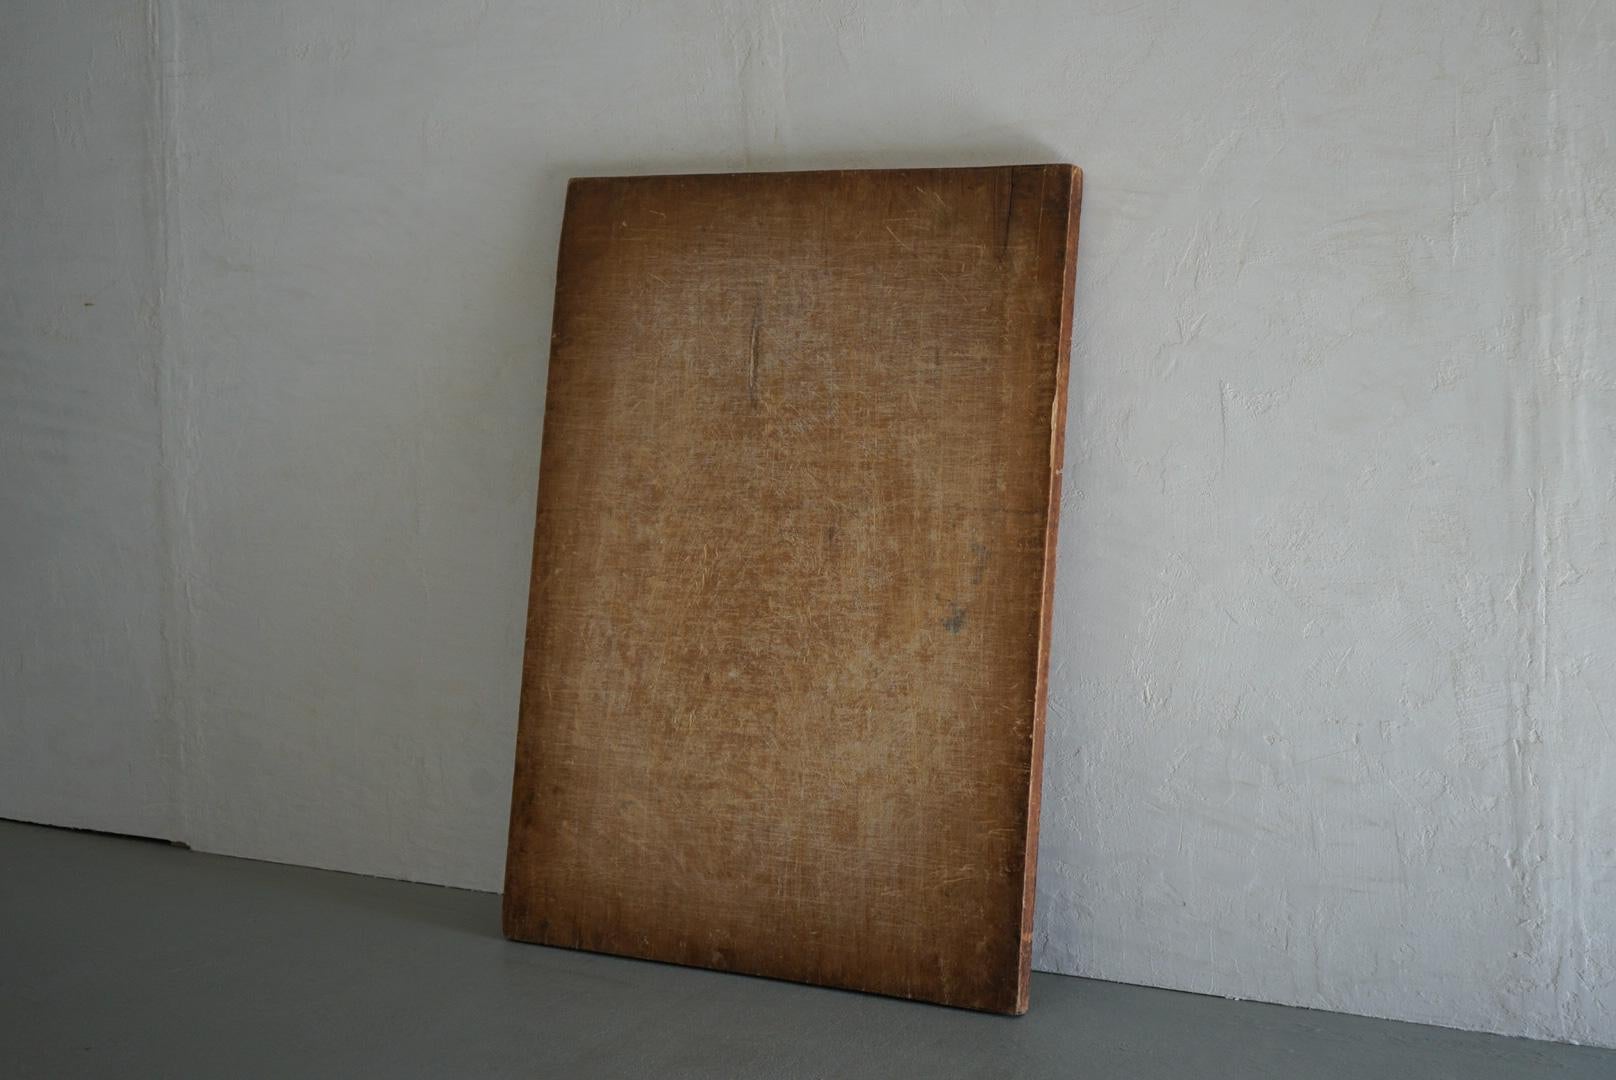 This is an old Japanese work board.

This was used to roll mochi into balls.
That is why traces of wheat remain.

In the past, when food conditions were harsh, rice cakes and other foods eaten on special occasions must have been much more of a treat